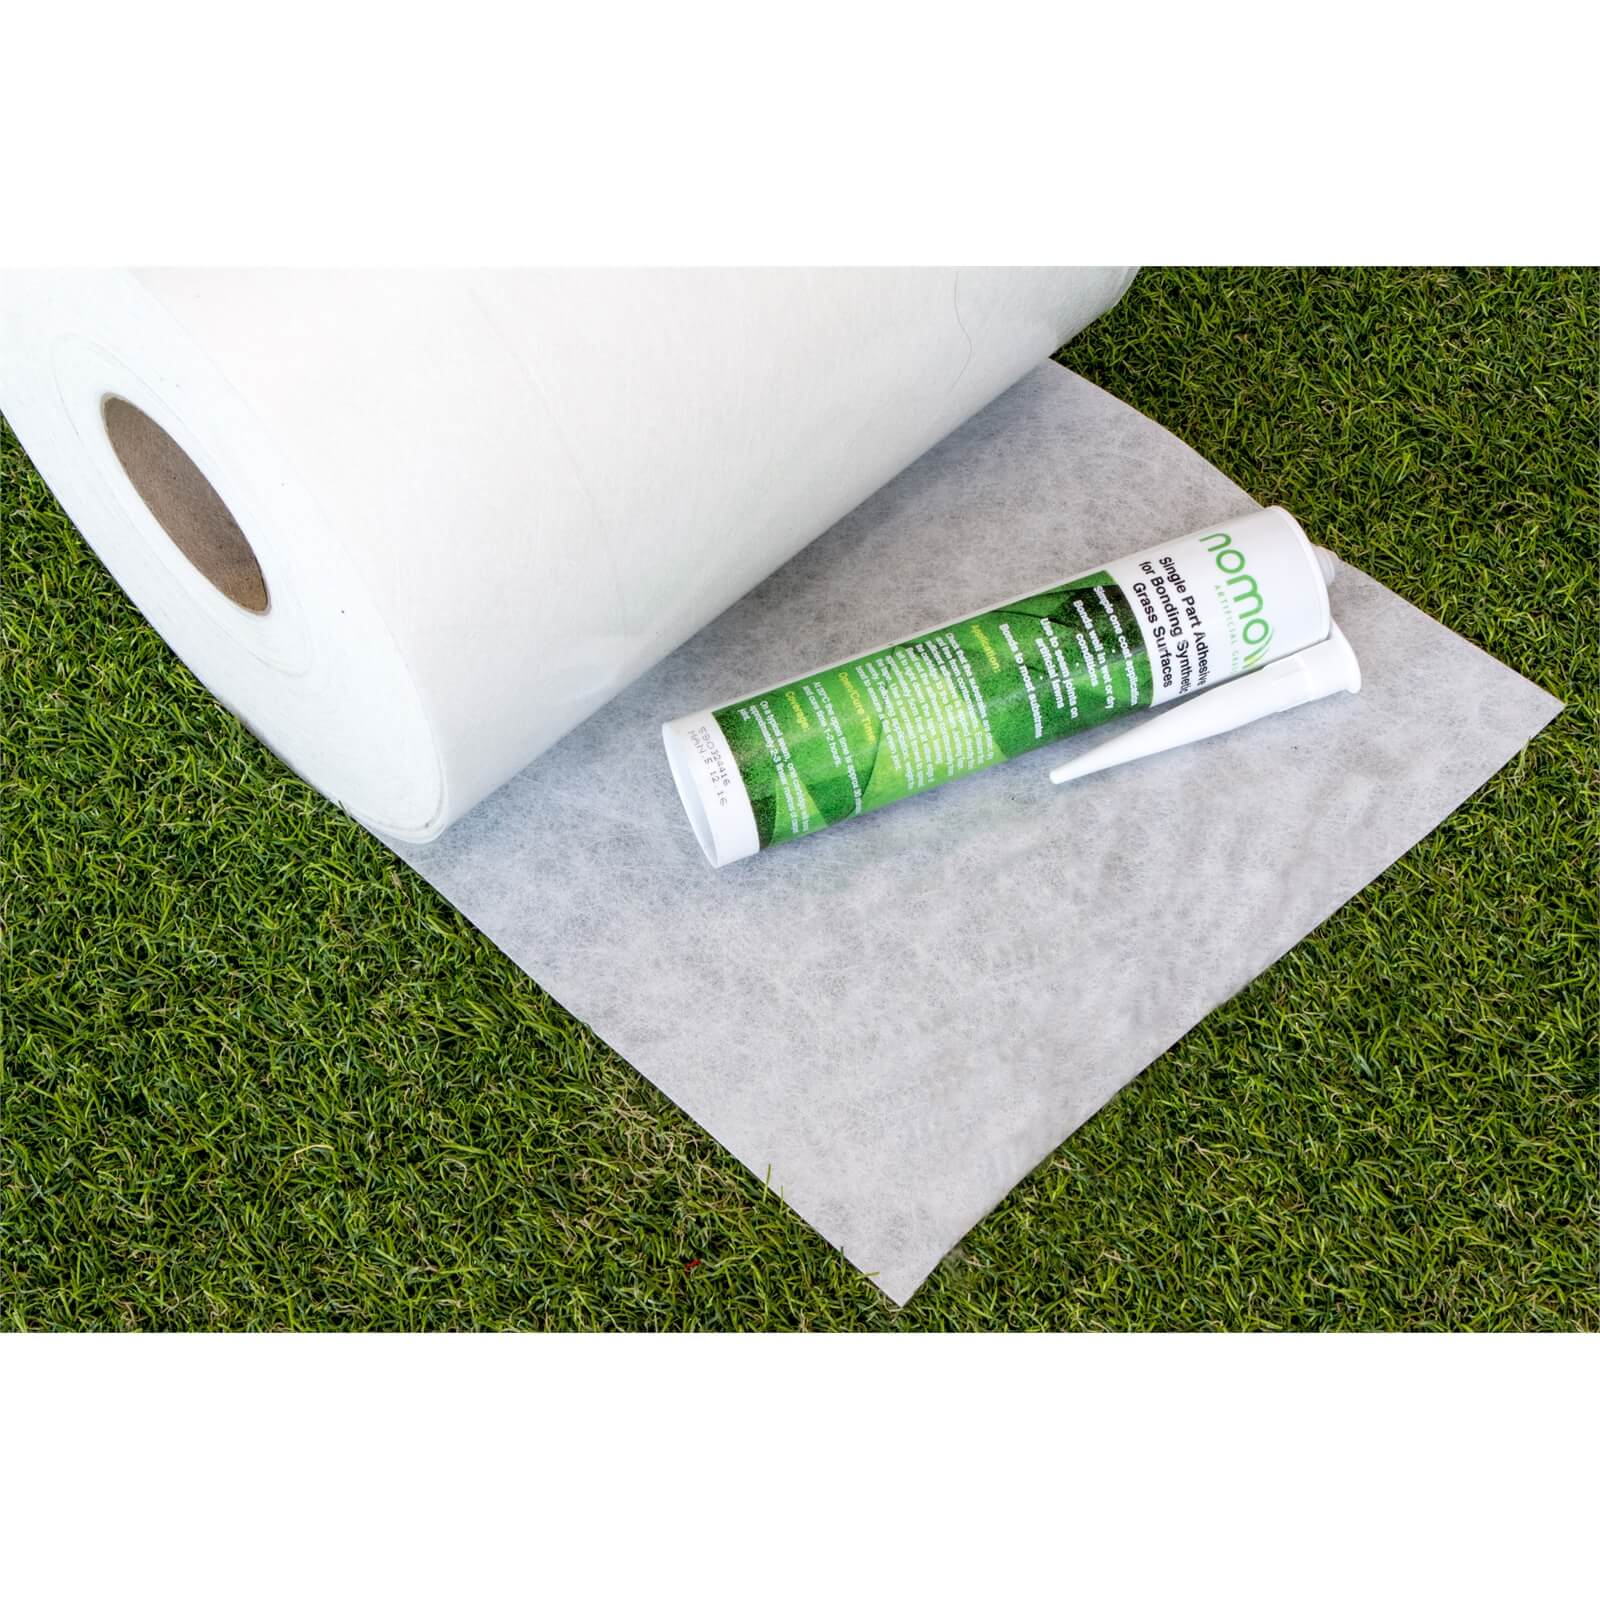 Photo of Nomow Joining Kits For Artificial Grass - 3m